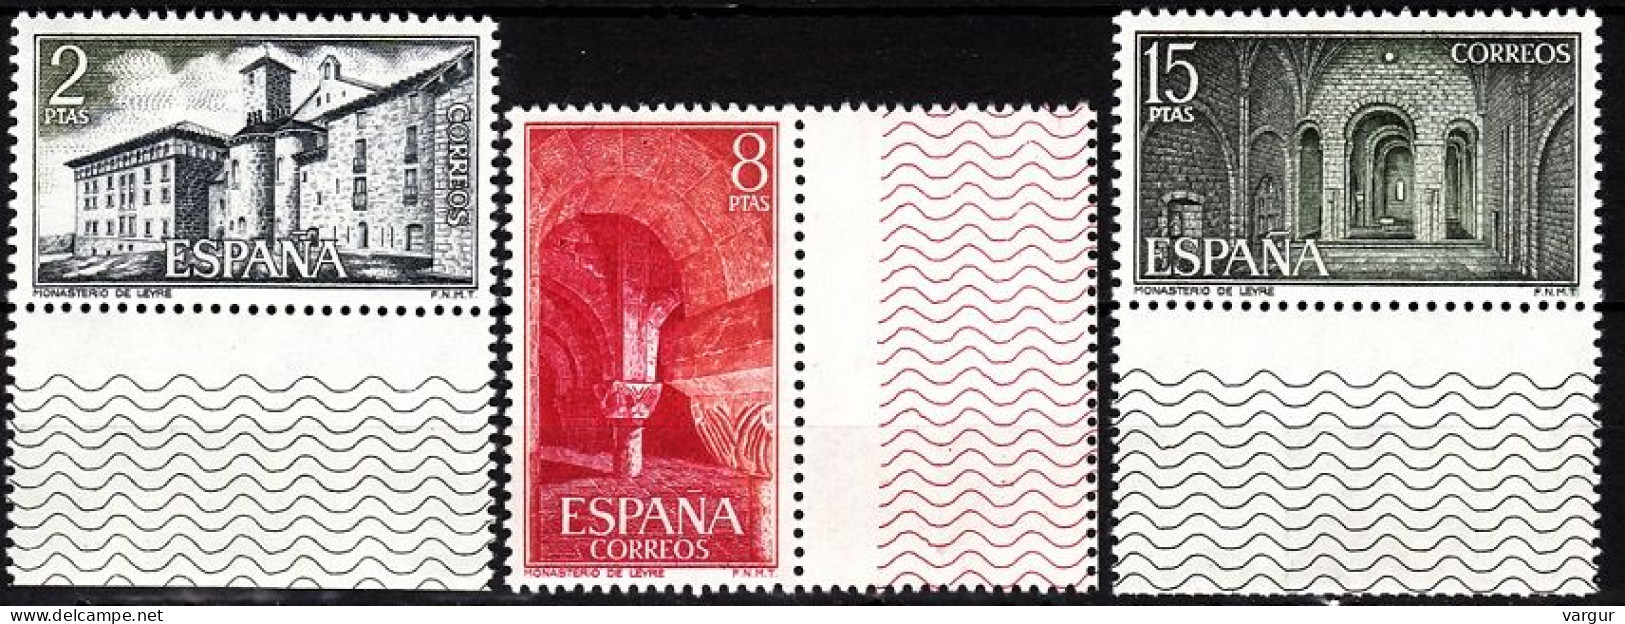 SPAIN 1974 ARCHITECTURE: Castles And Abbeys. Complete, MNH - Castillos